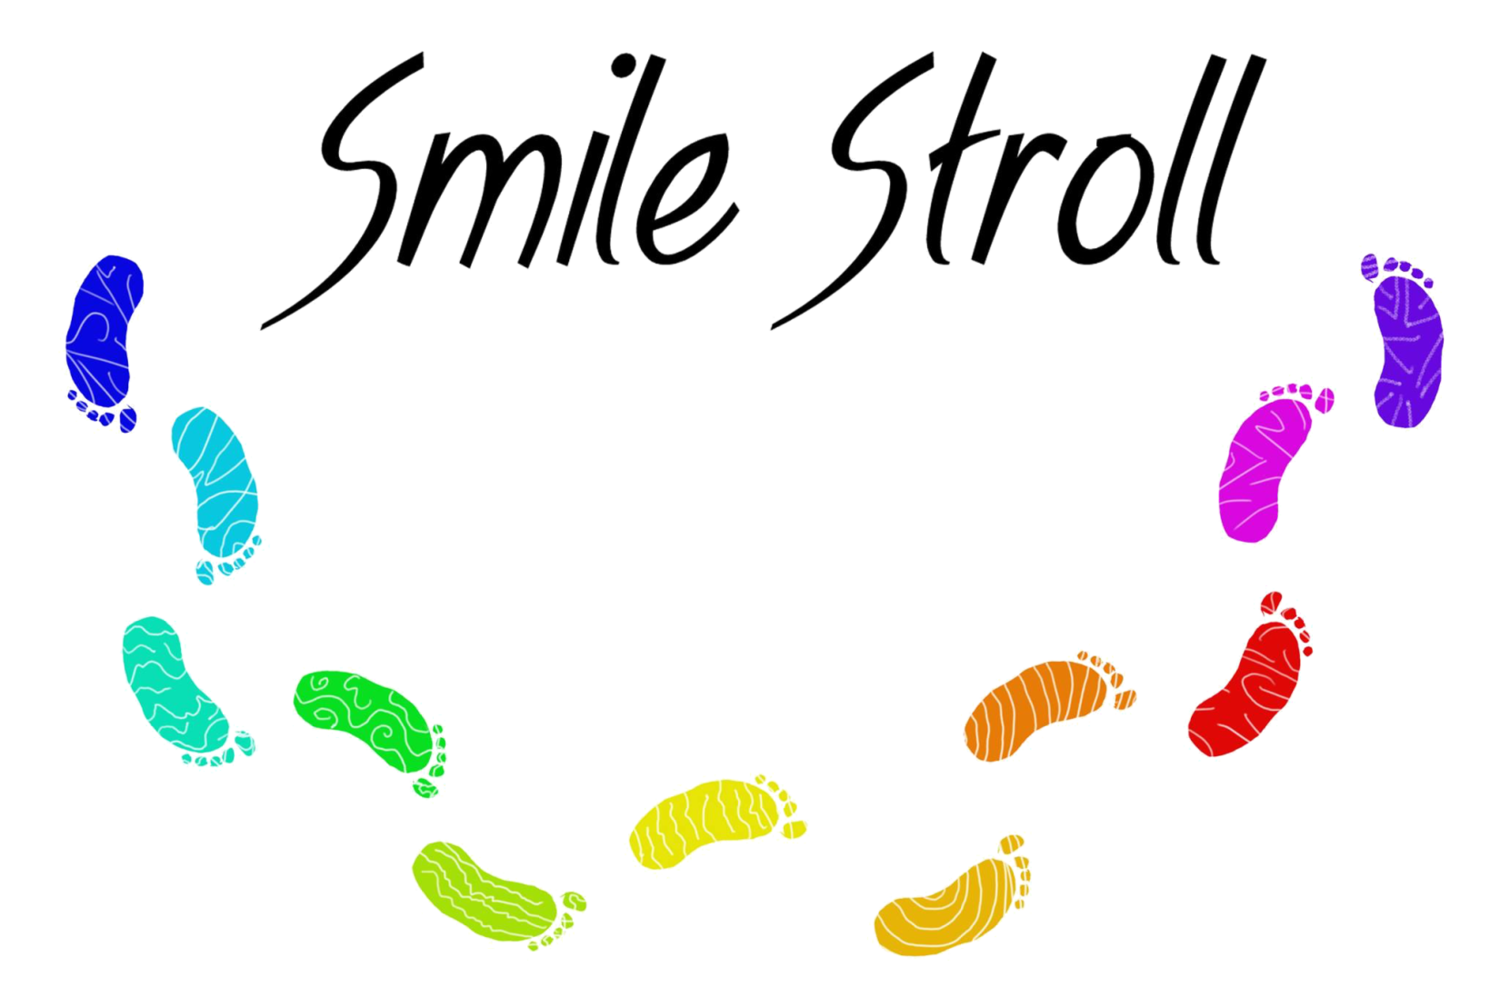 The Smile Stroll